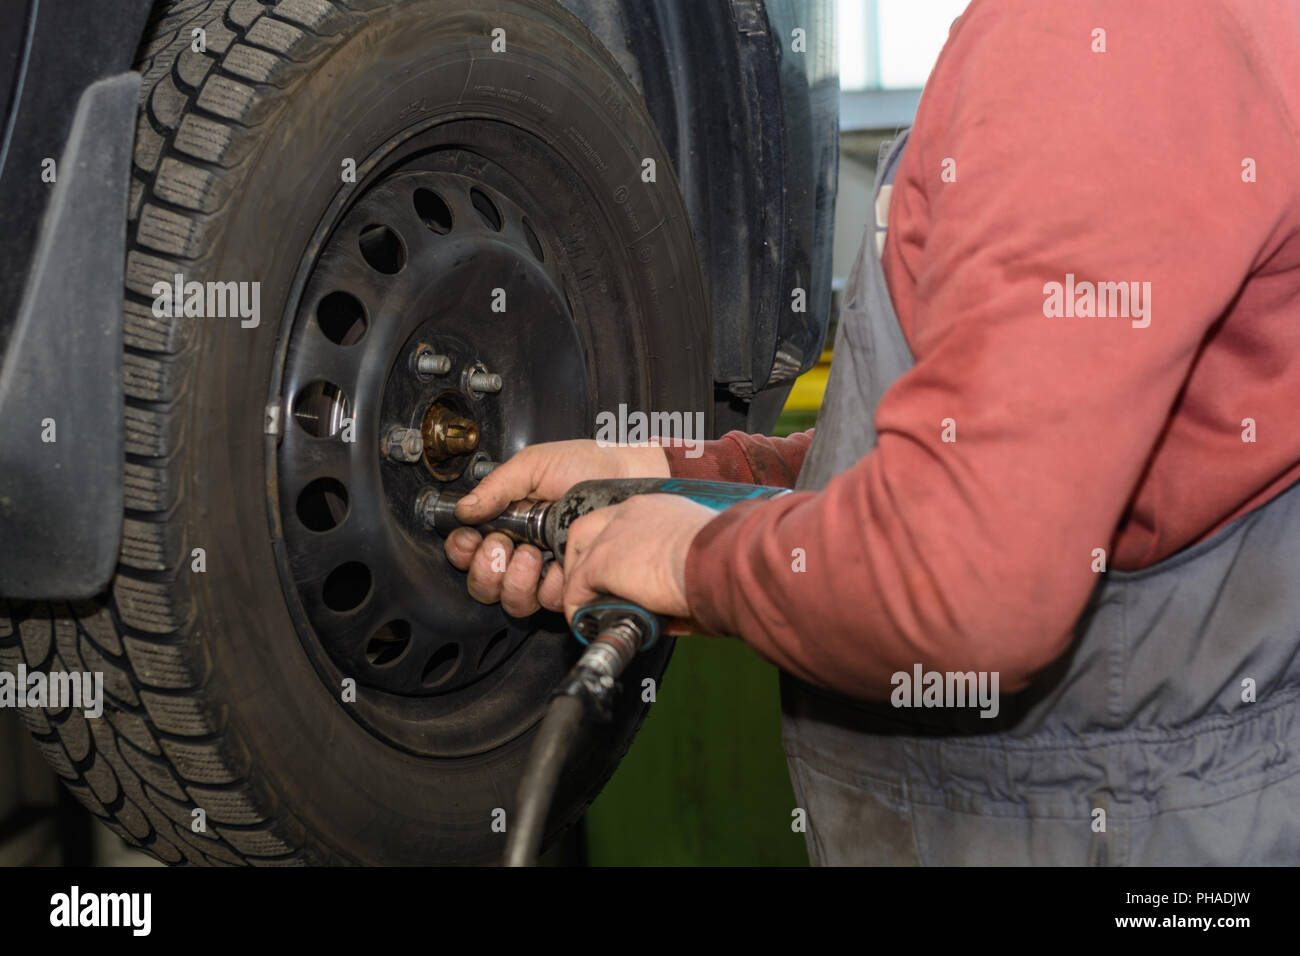 Tradesman changes with a impact driver car tire Stock Photo